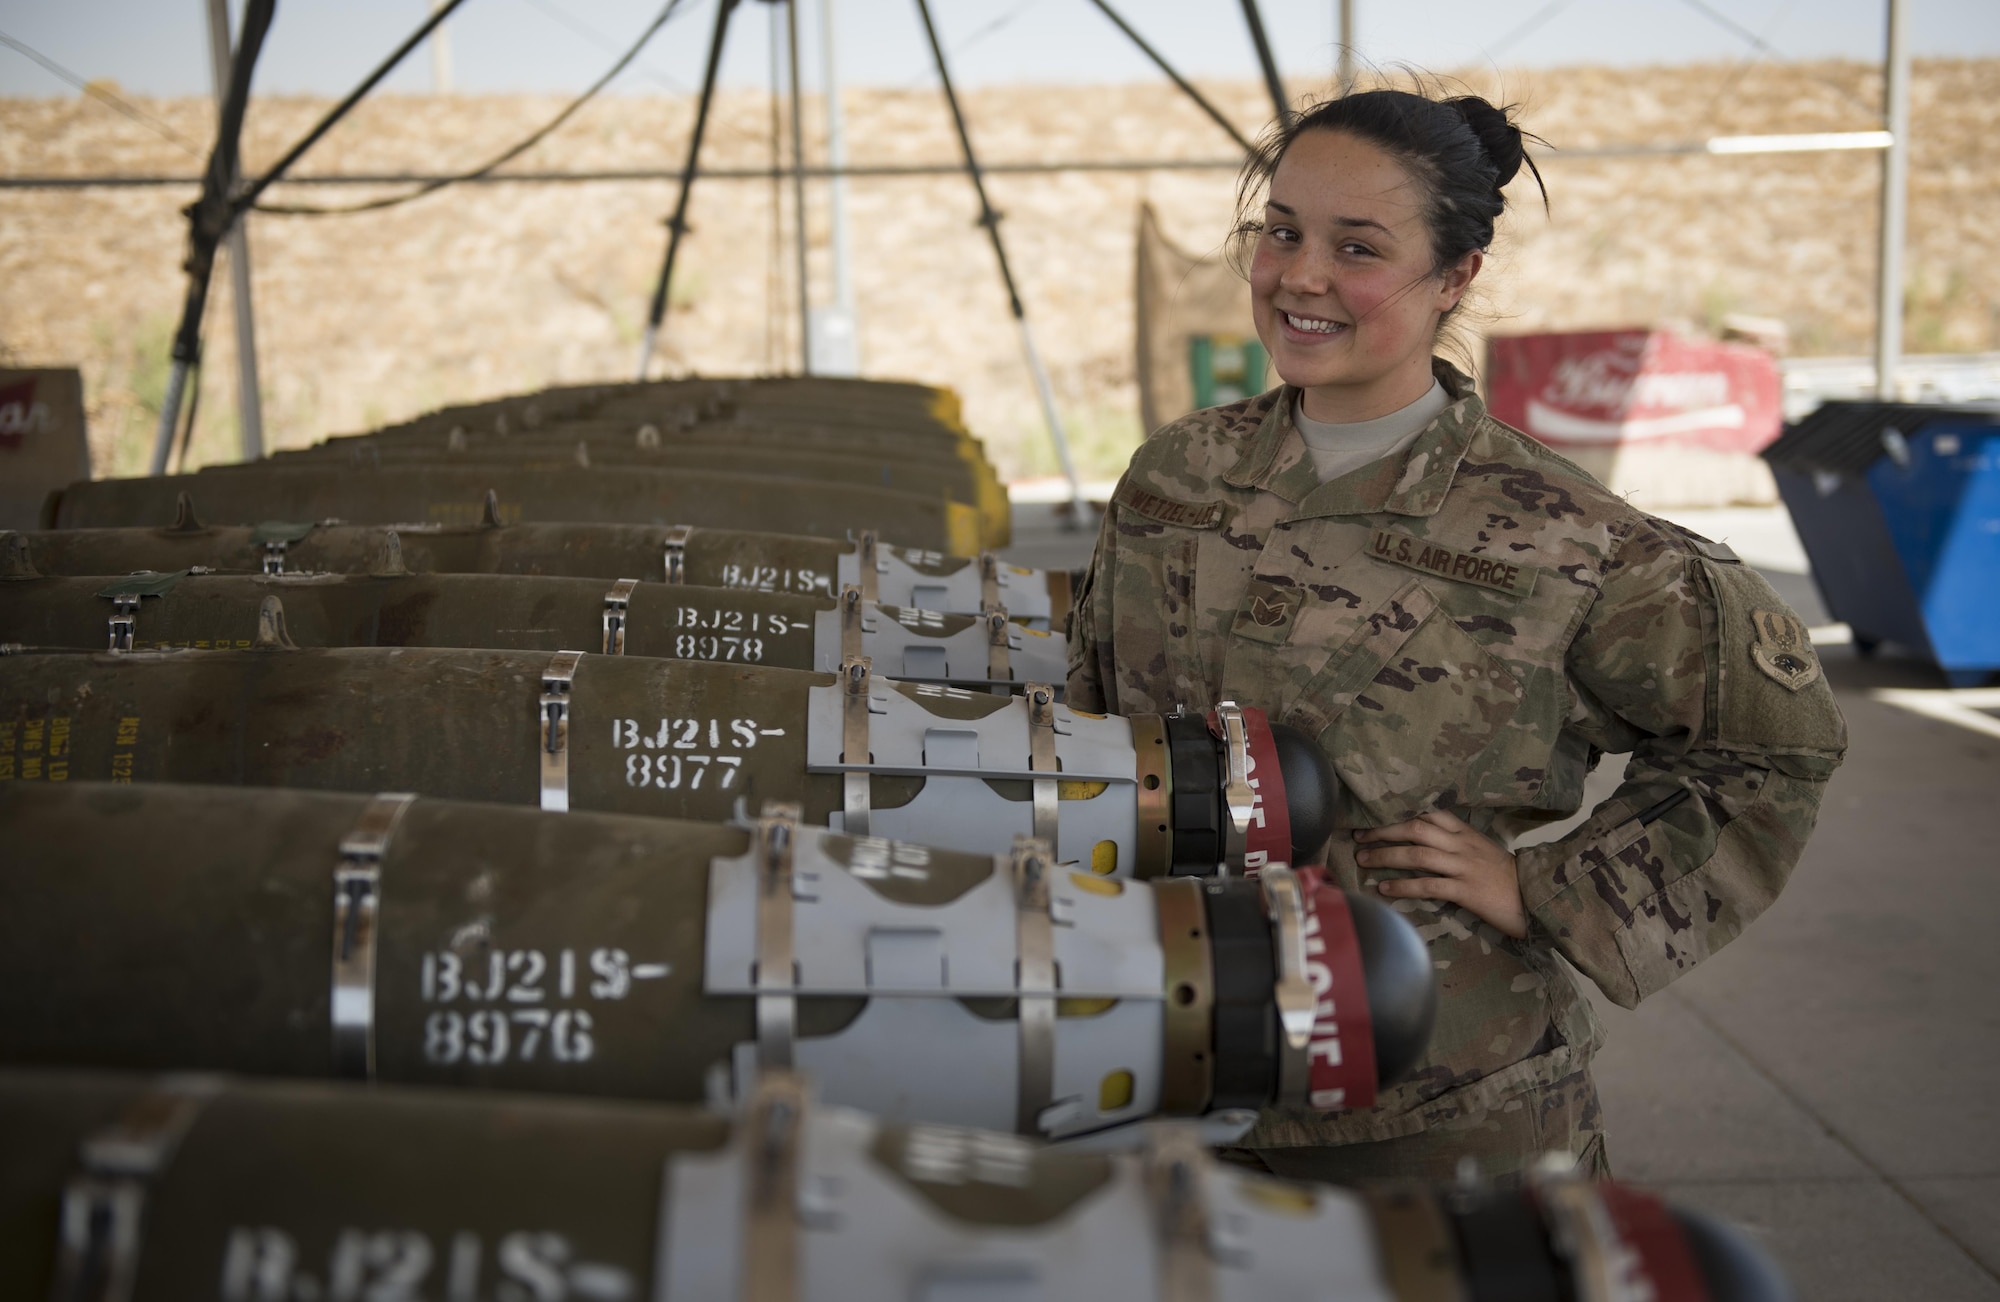 Staff Sgt. Ahbree Wetzel-Lee is a munitions systems specialist assigned to the 455th Expeditionary Maintenance Squadron, Bagram Airfield, Afghanistan.